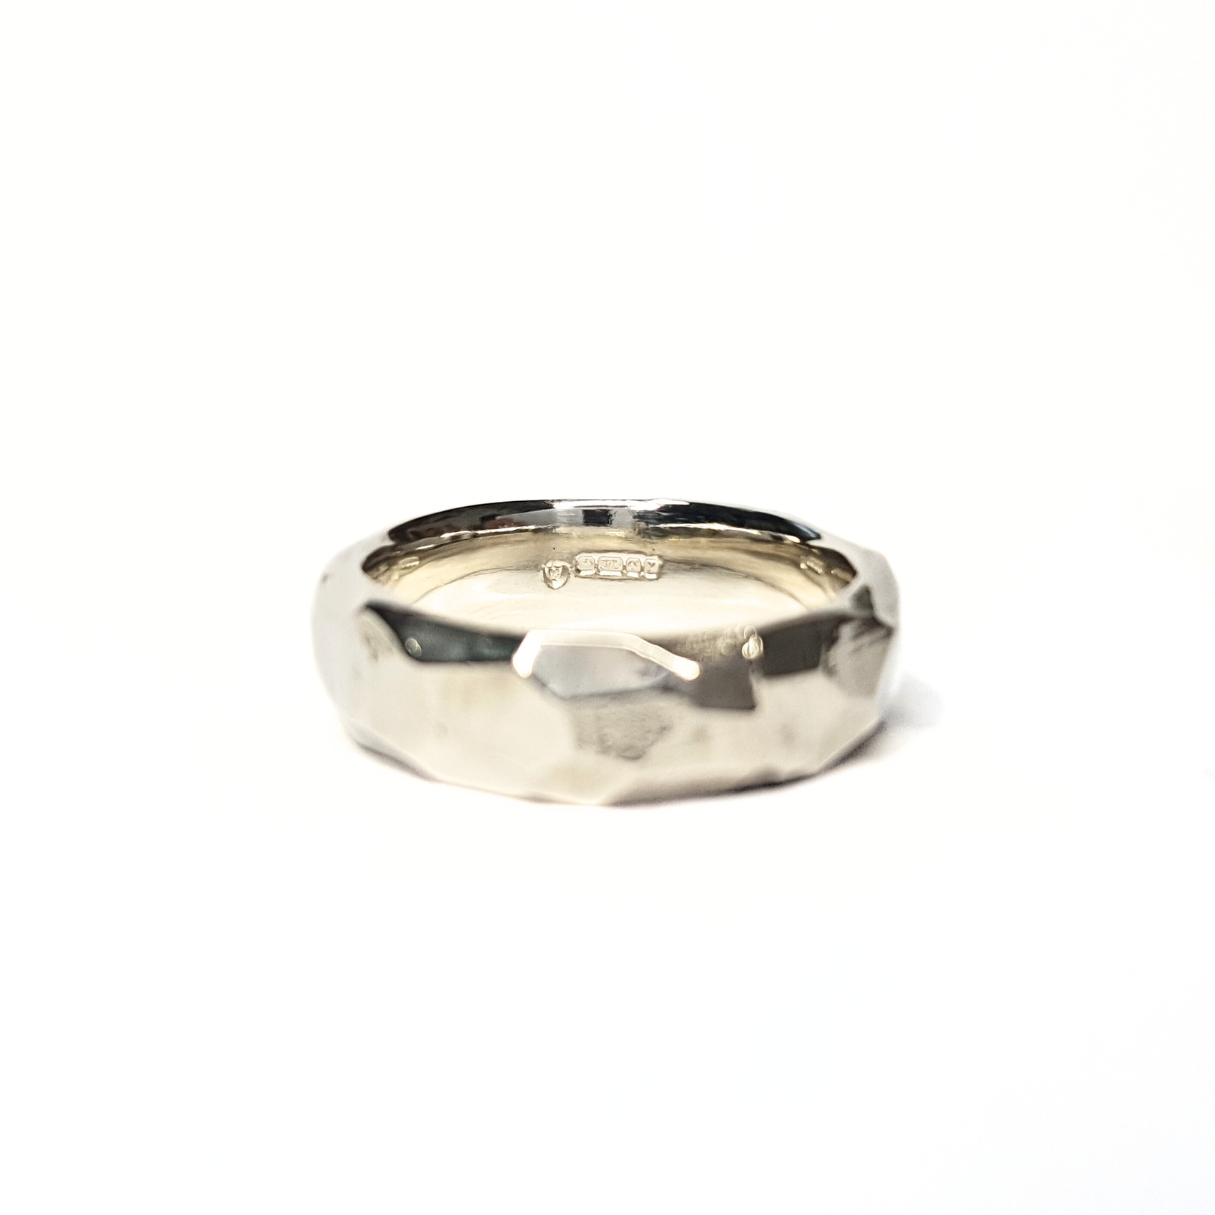 A 9ct white gold rough cut and faceted ring sits against a crisp, white background. The front of the ring is out of focus but the inside of the ring is in focus showing the hallmarks.